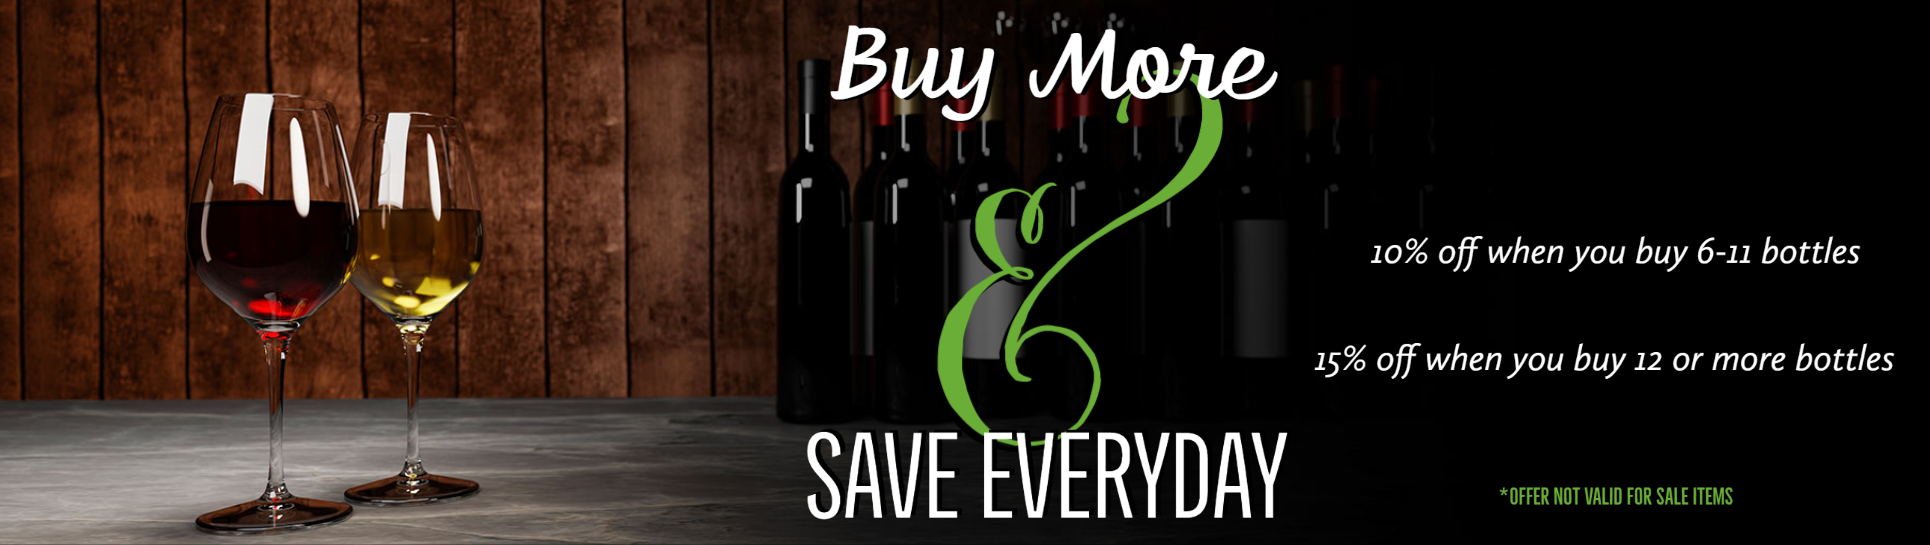 Wine Specials Home Page